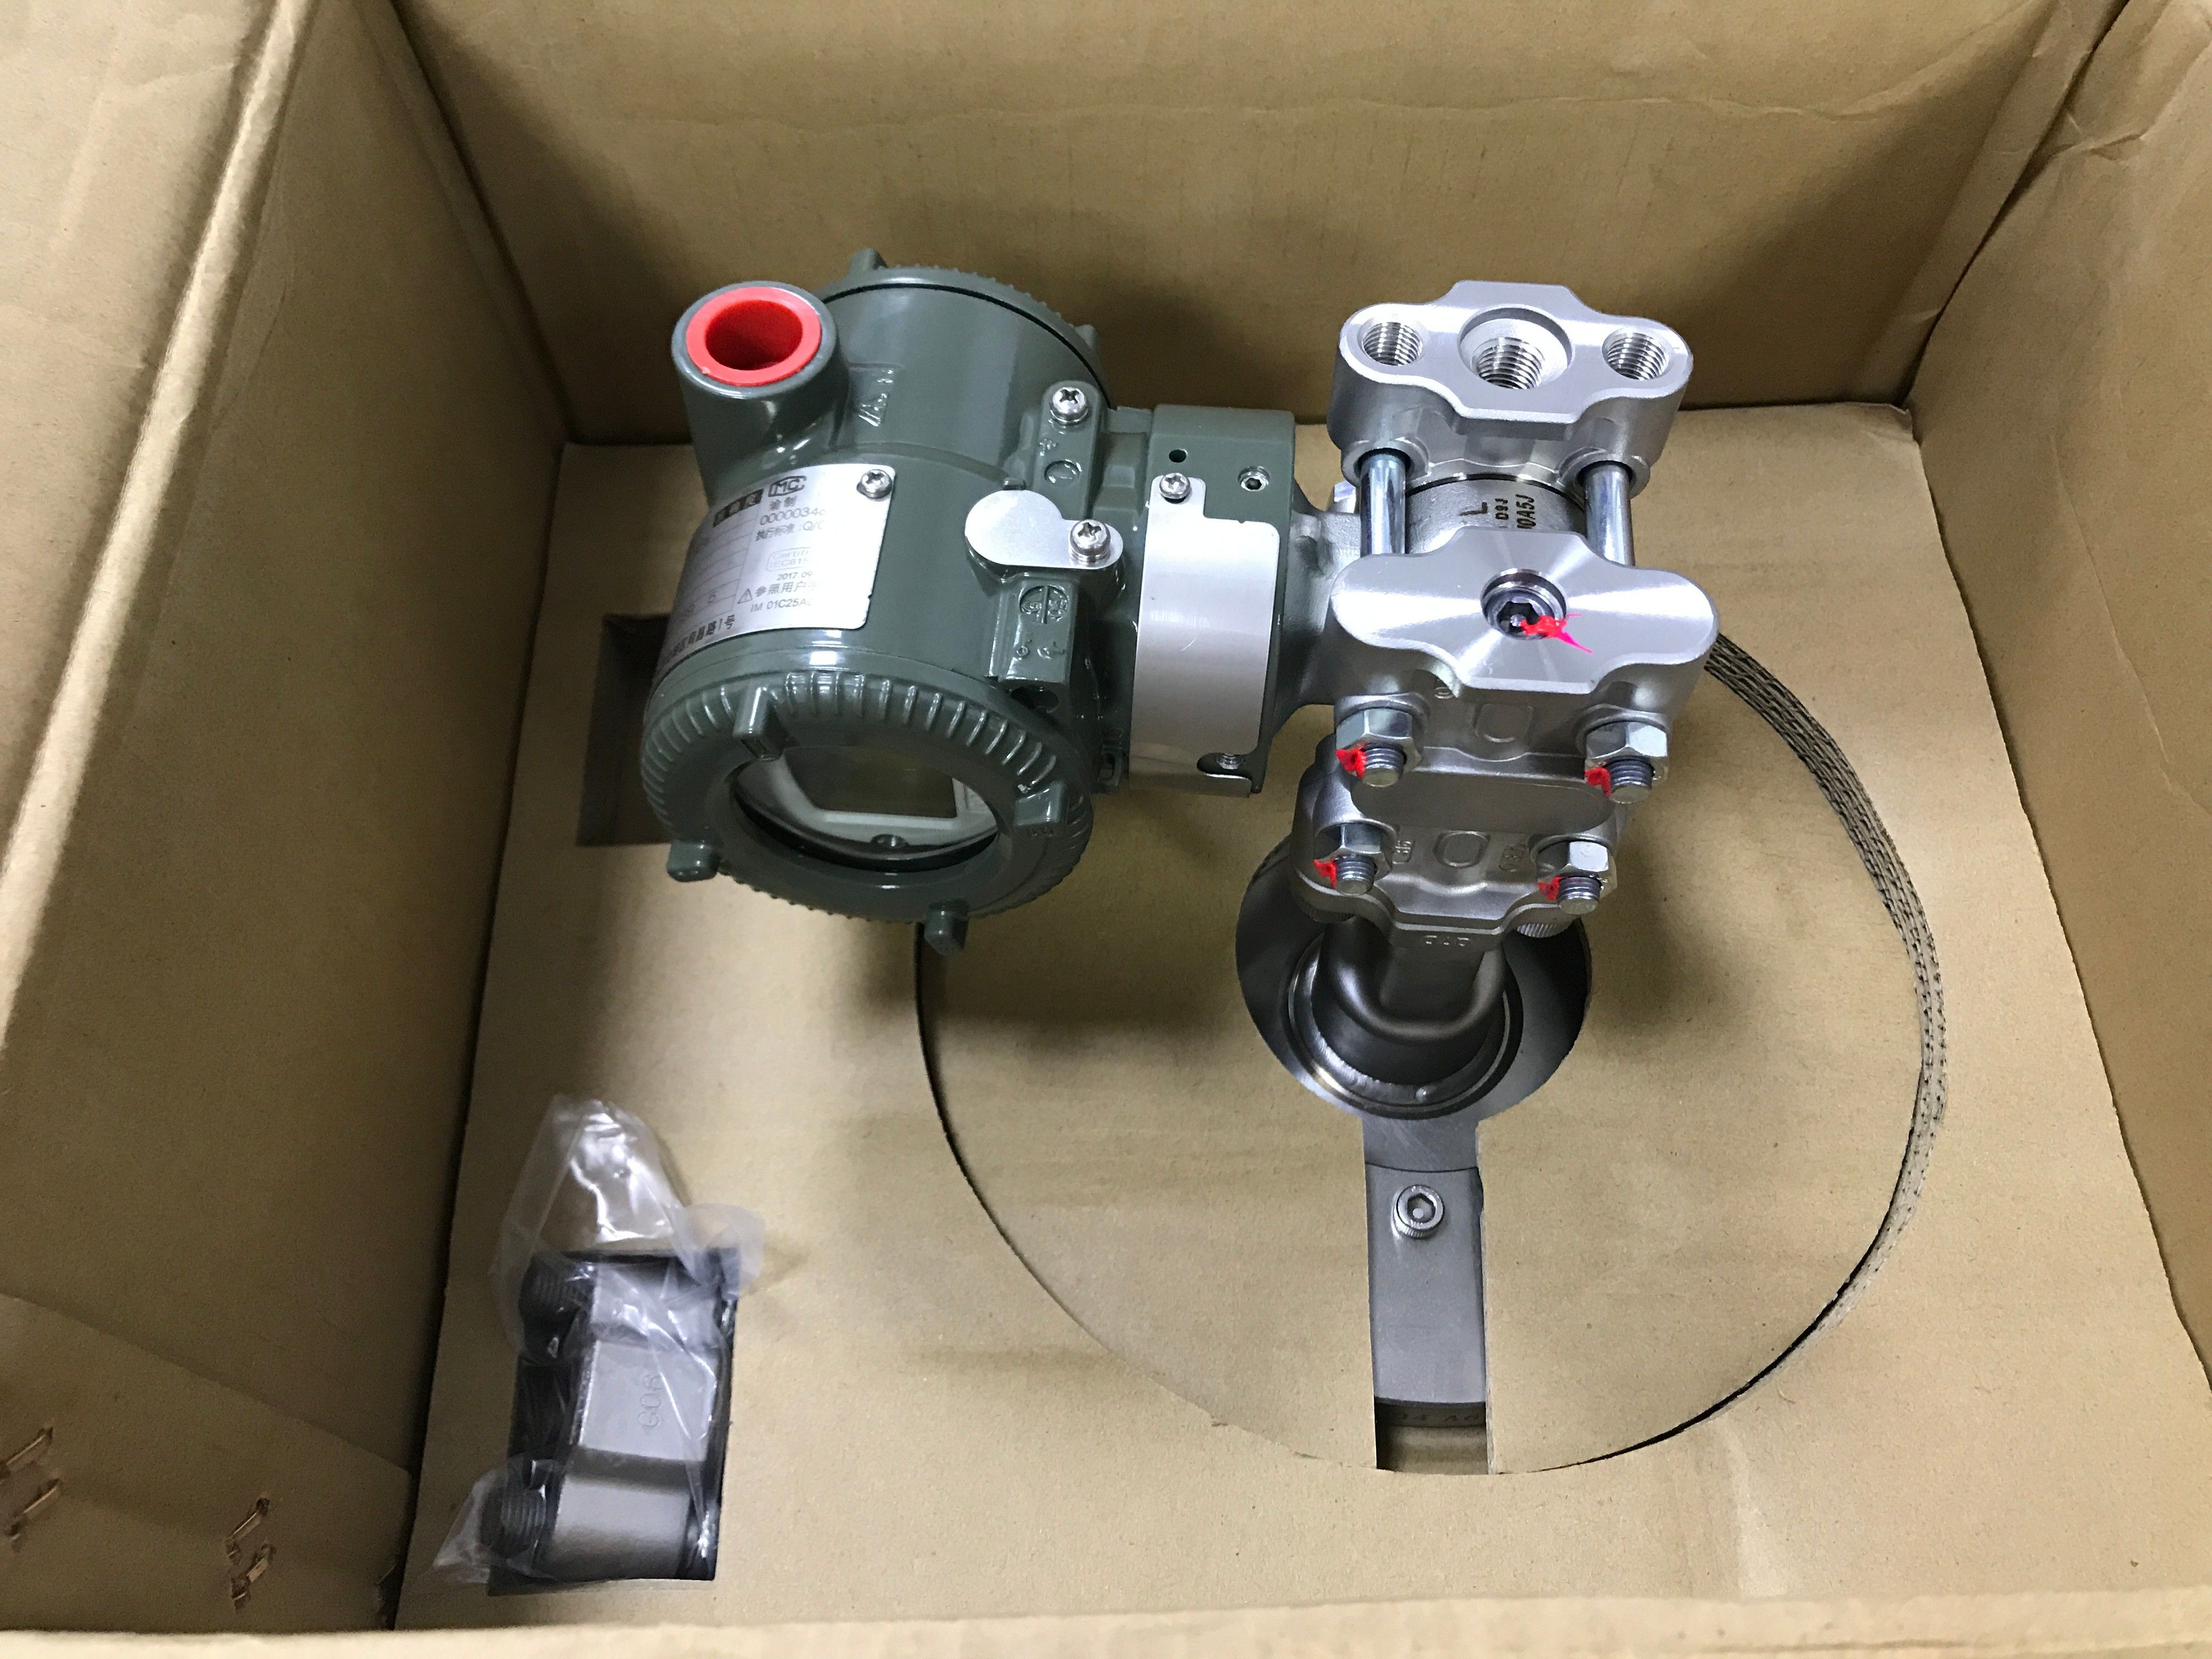 Yokogawa EJX510A In-Line Mount Absolute Pressure Transmitter based on the EJX-A Series.